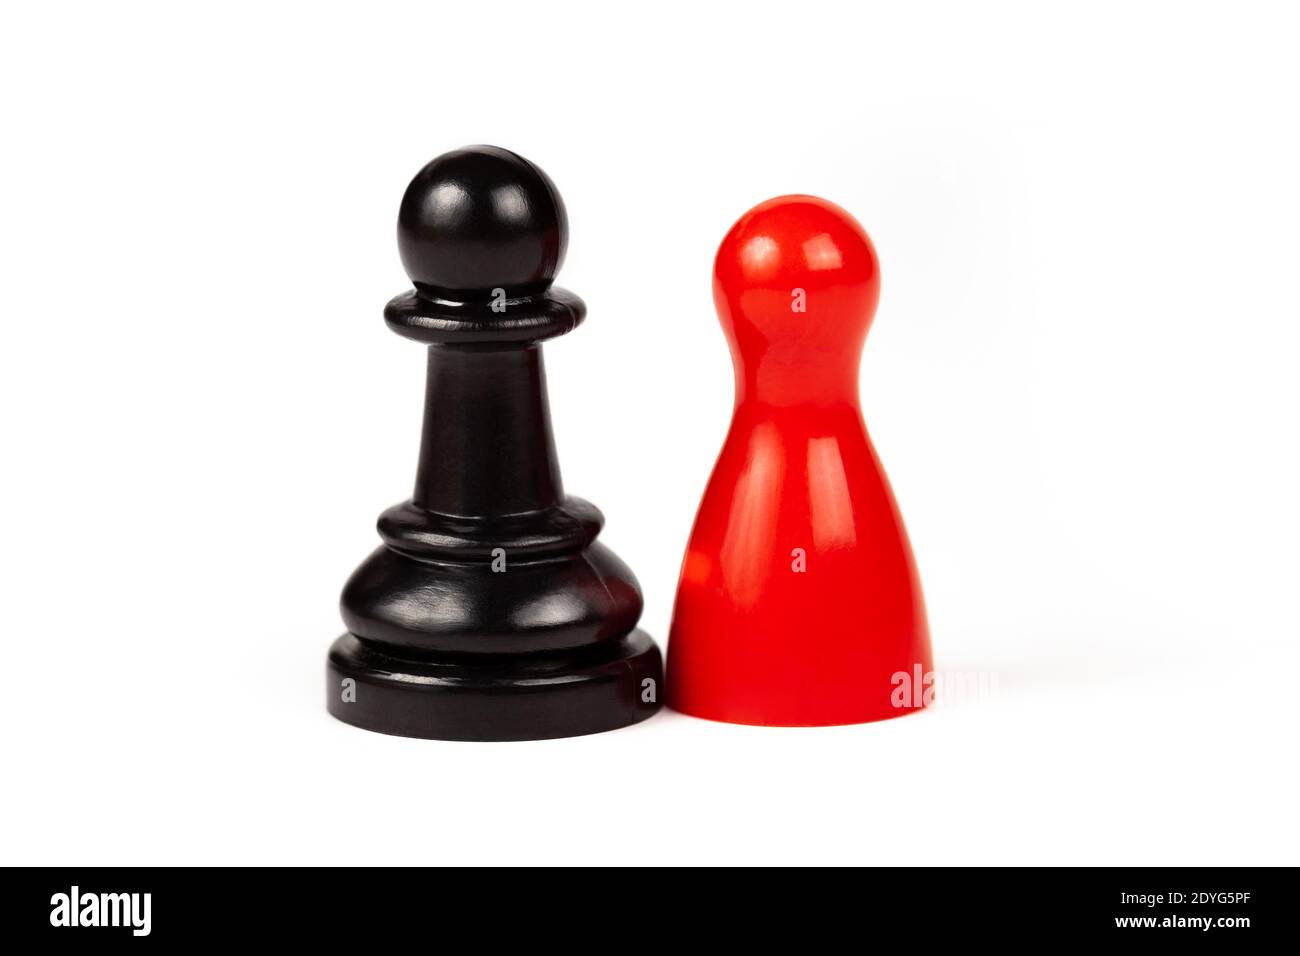 Differences paired togetherness concept, two pieces. Red game piece and a black chess pawn standing together, isolated on white, cut out. Diversity Stock Photo